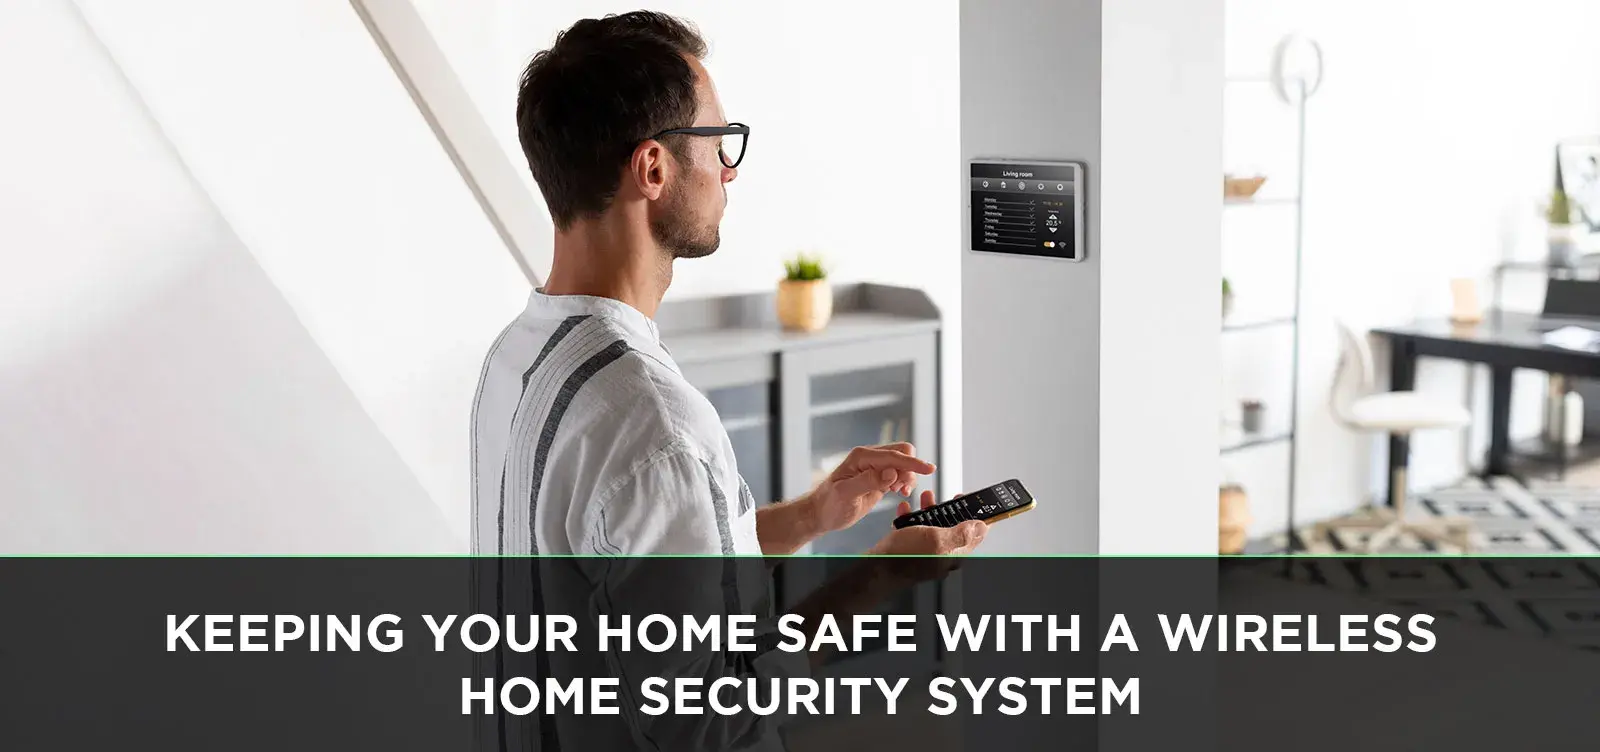 Keeping Your Home Safe With a Wireless Home Security System